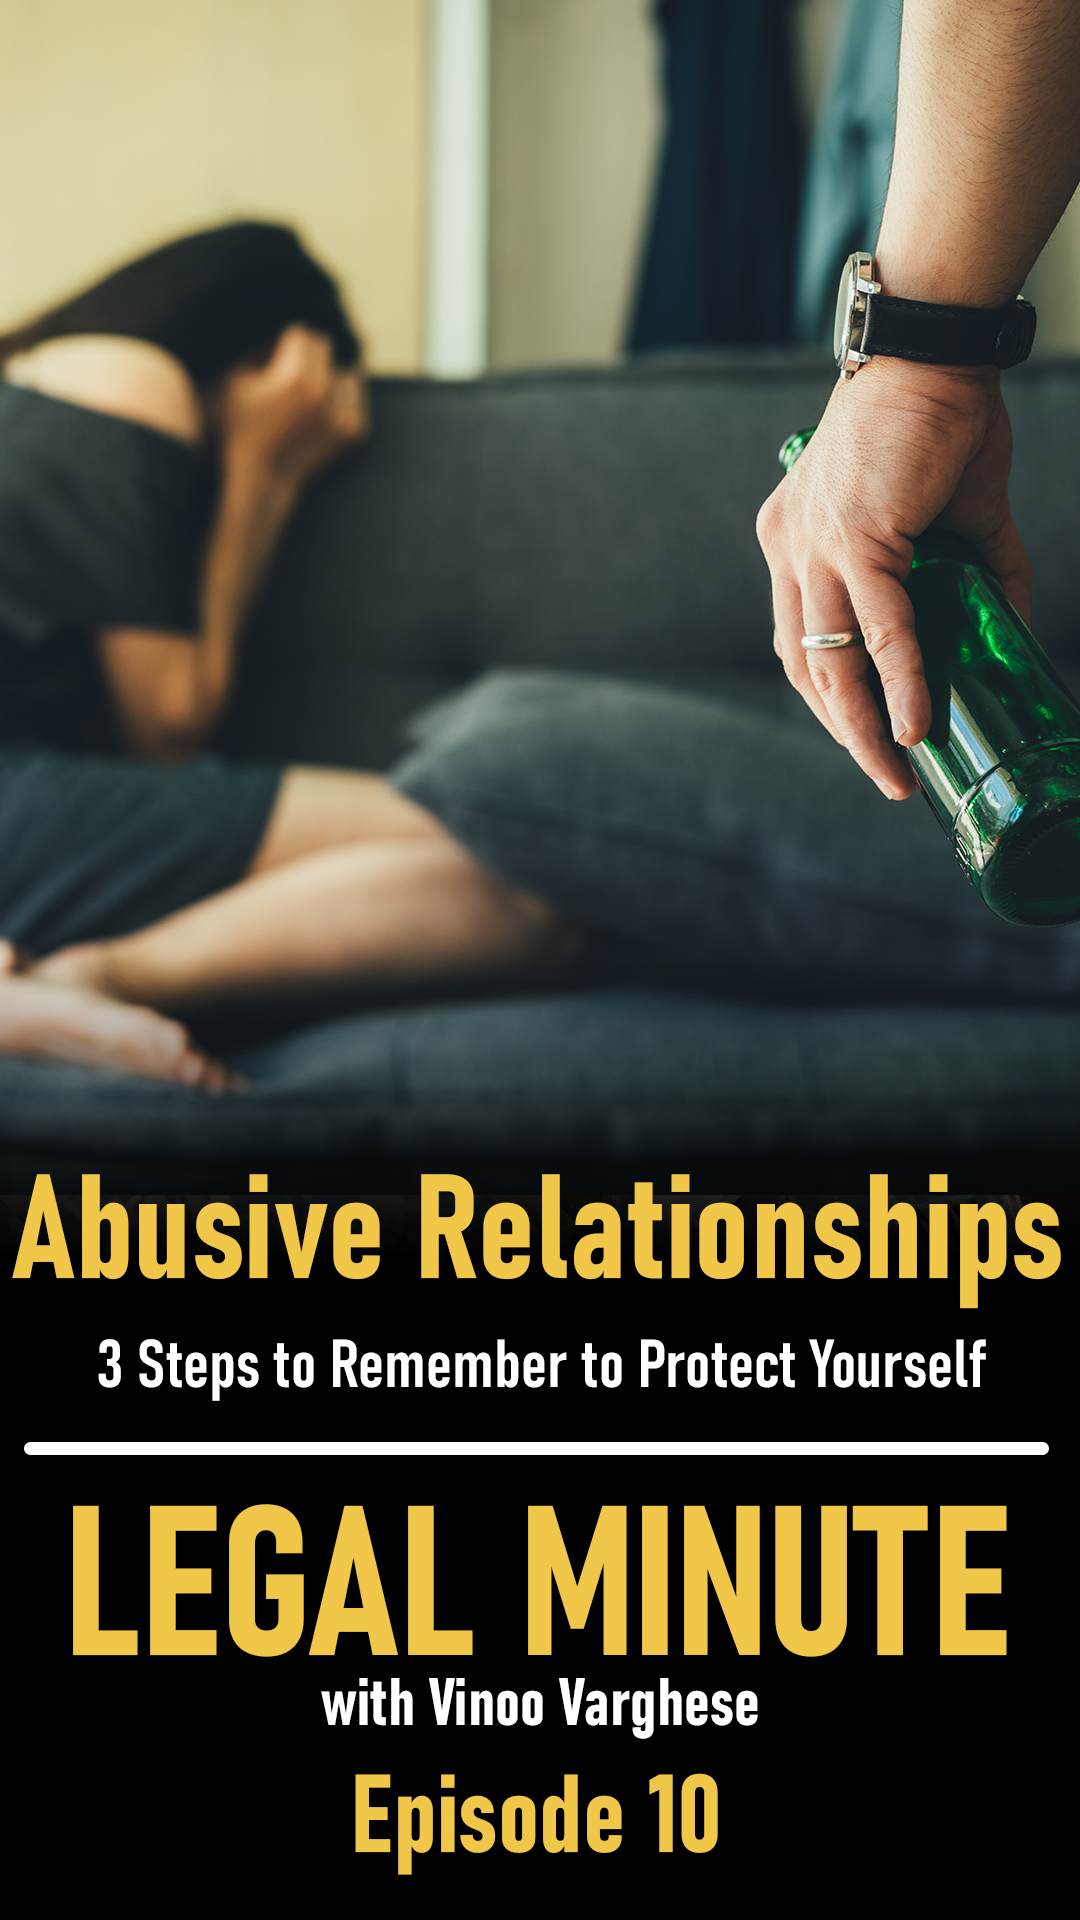 3 Important Steps To Follow When Dealing With an Abusive Relationship